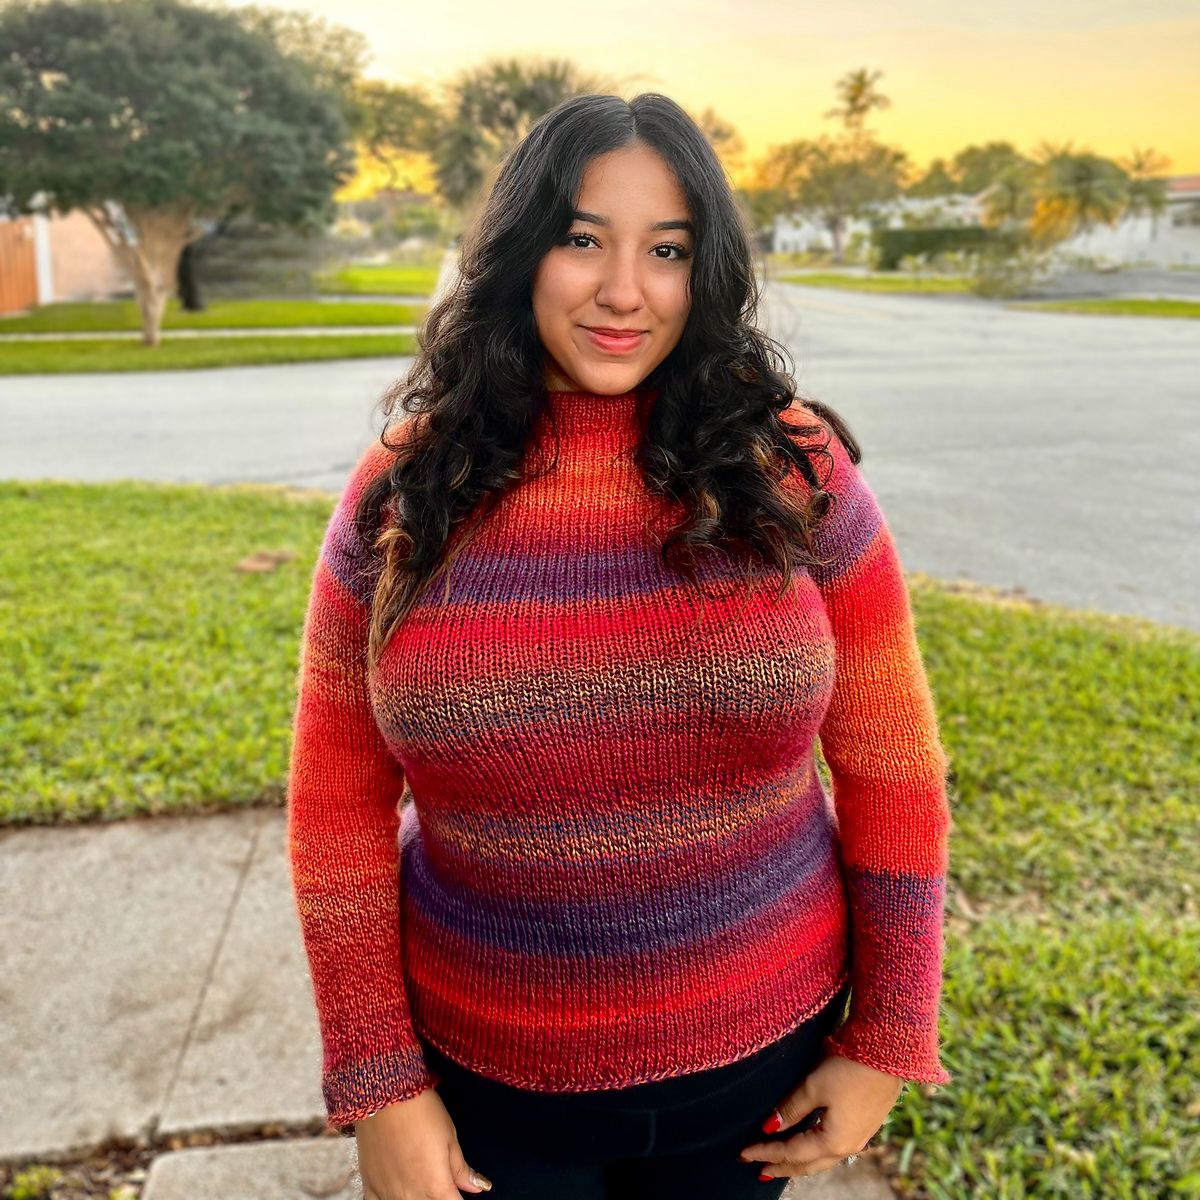 a woman stands directly in front of the camera at sunset. she wears a sweater in striped yarn with shades of red, pink, orange, and purple, which glows in the golden hour light.